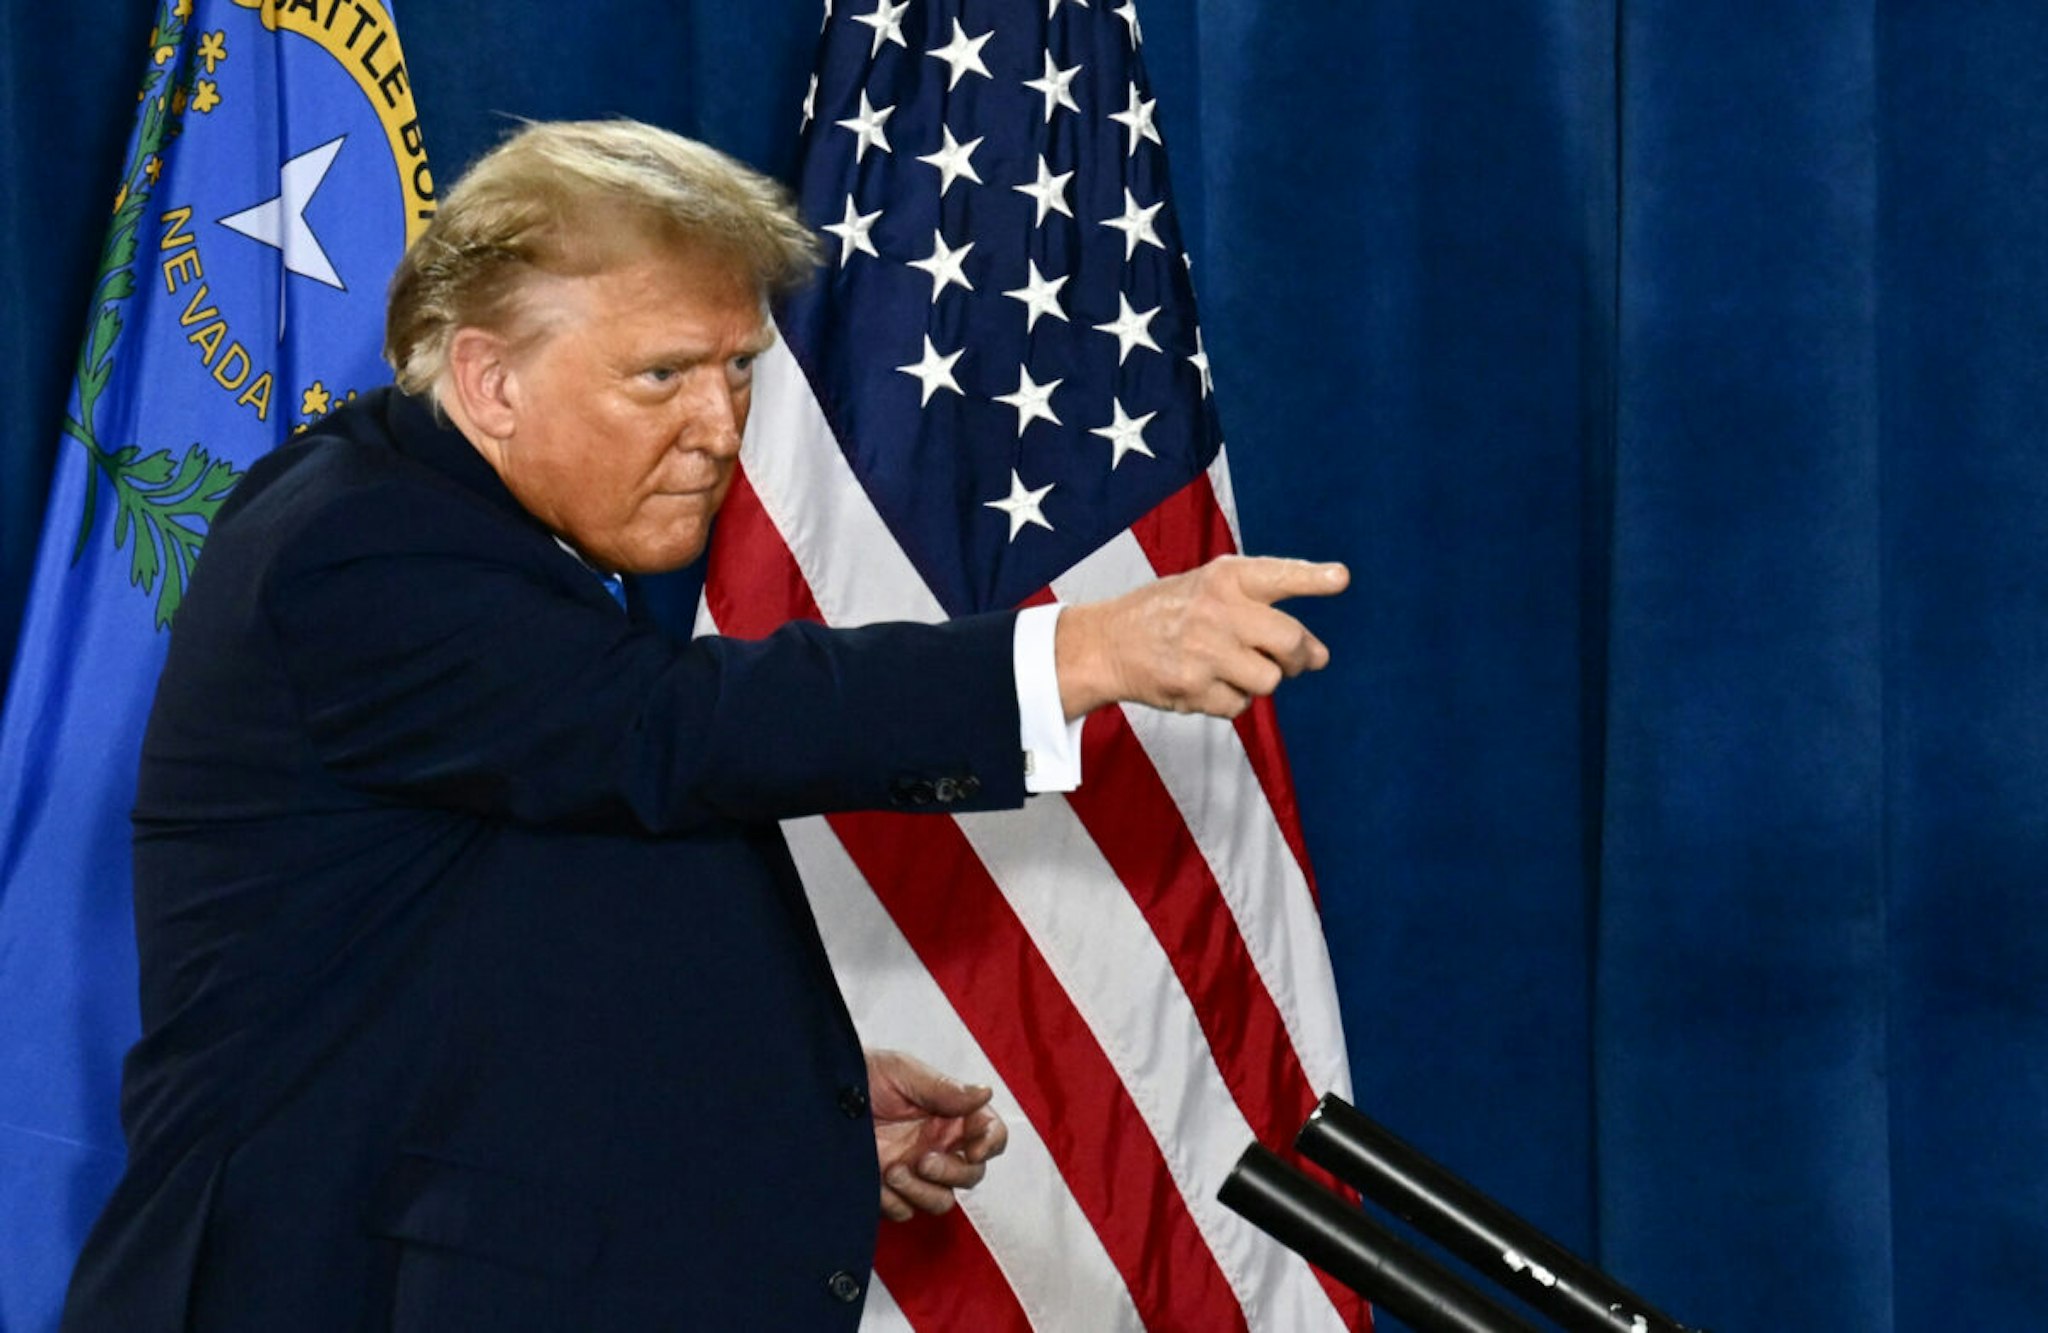 Former US President and 2024 presidential hopeful Donald Trump points after speaking at a Commit to Caucus Rally in Las Vegas, Nevada, on January 27, 2024.